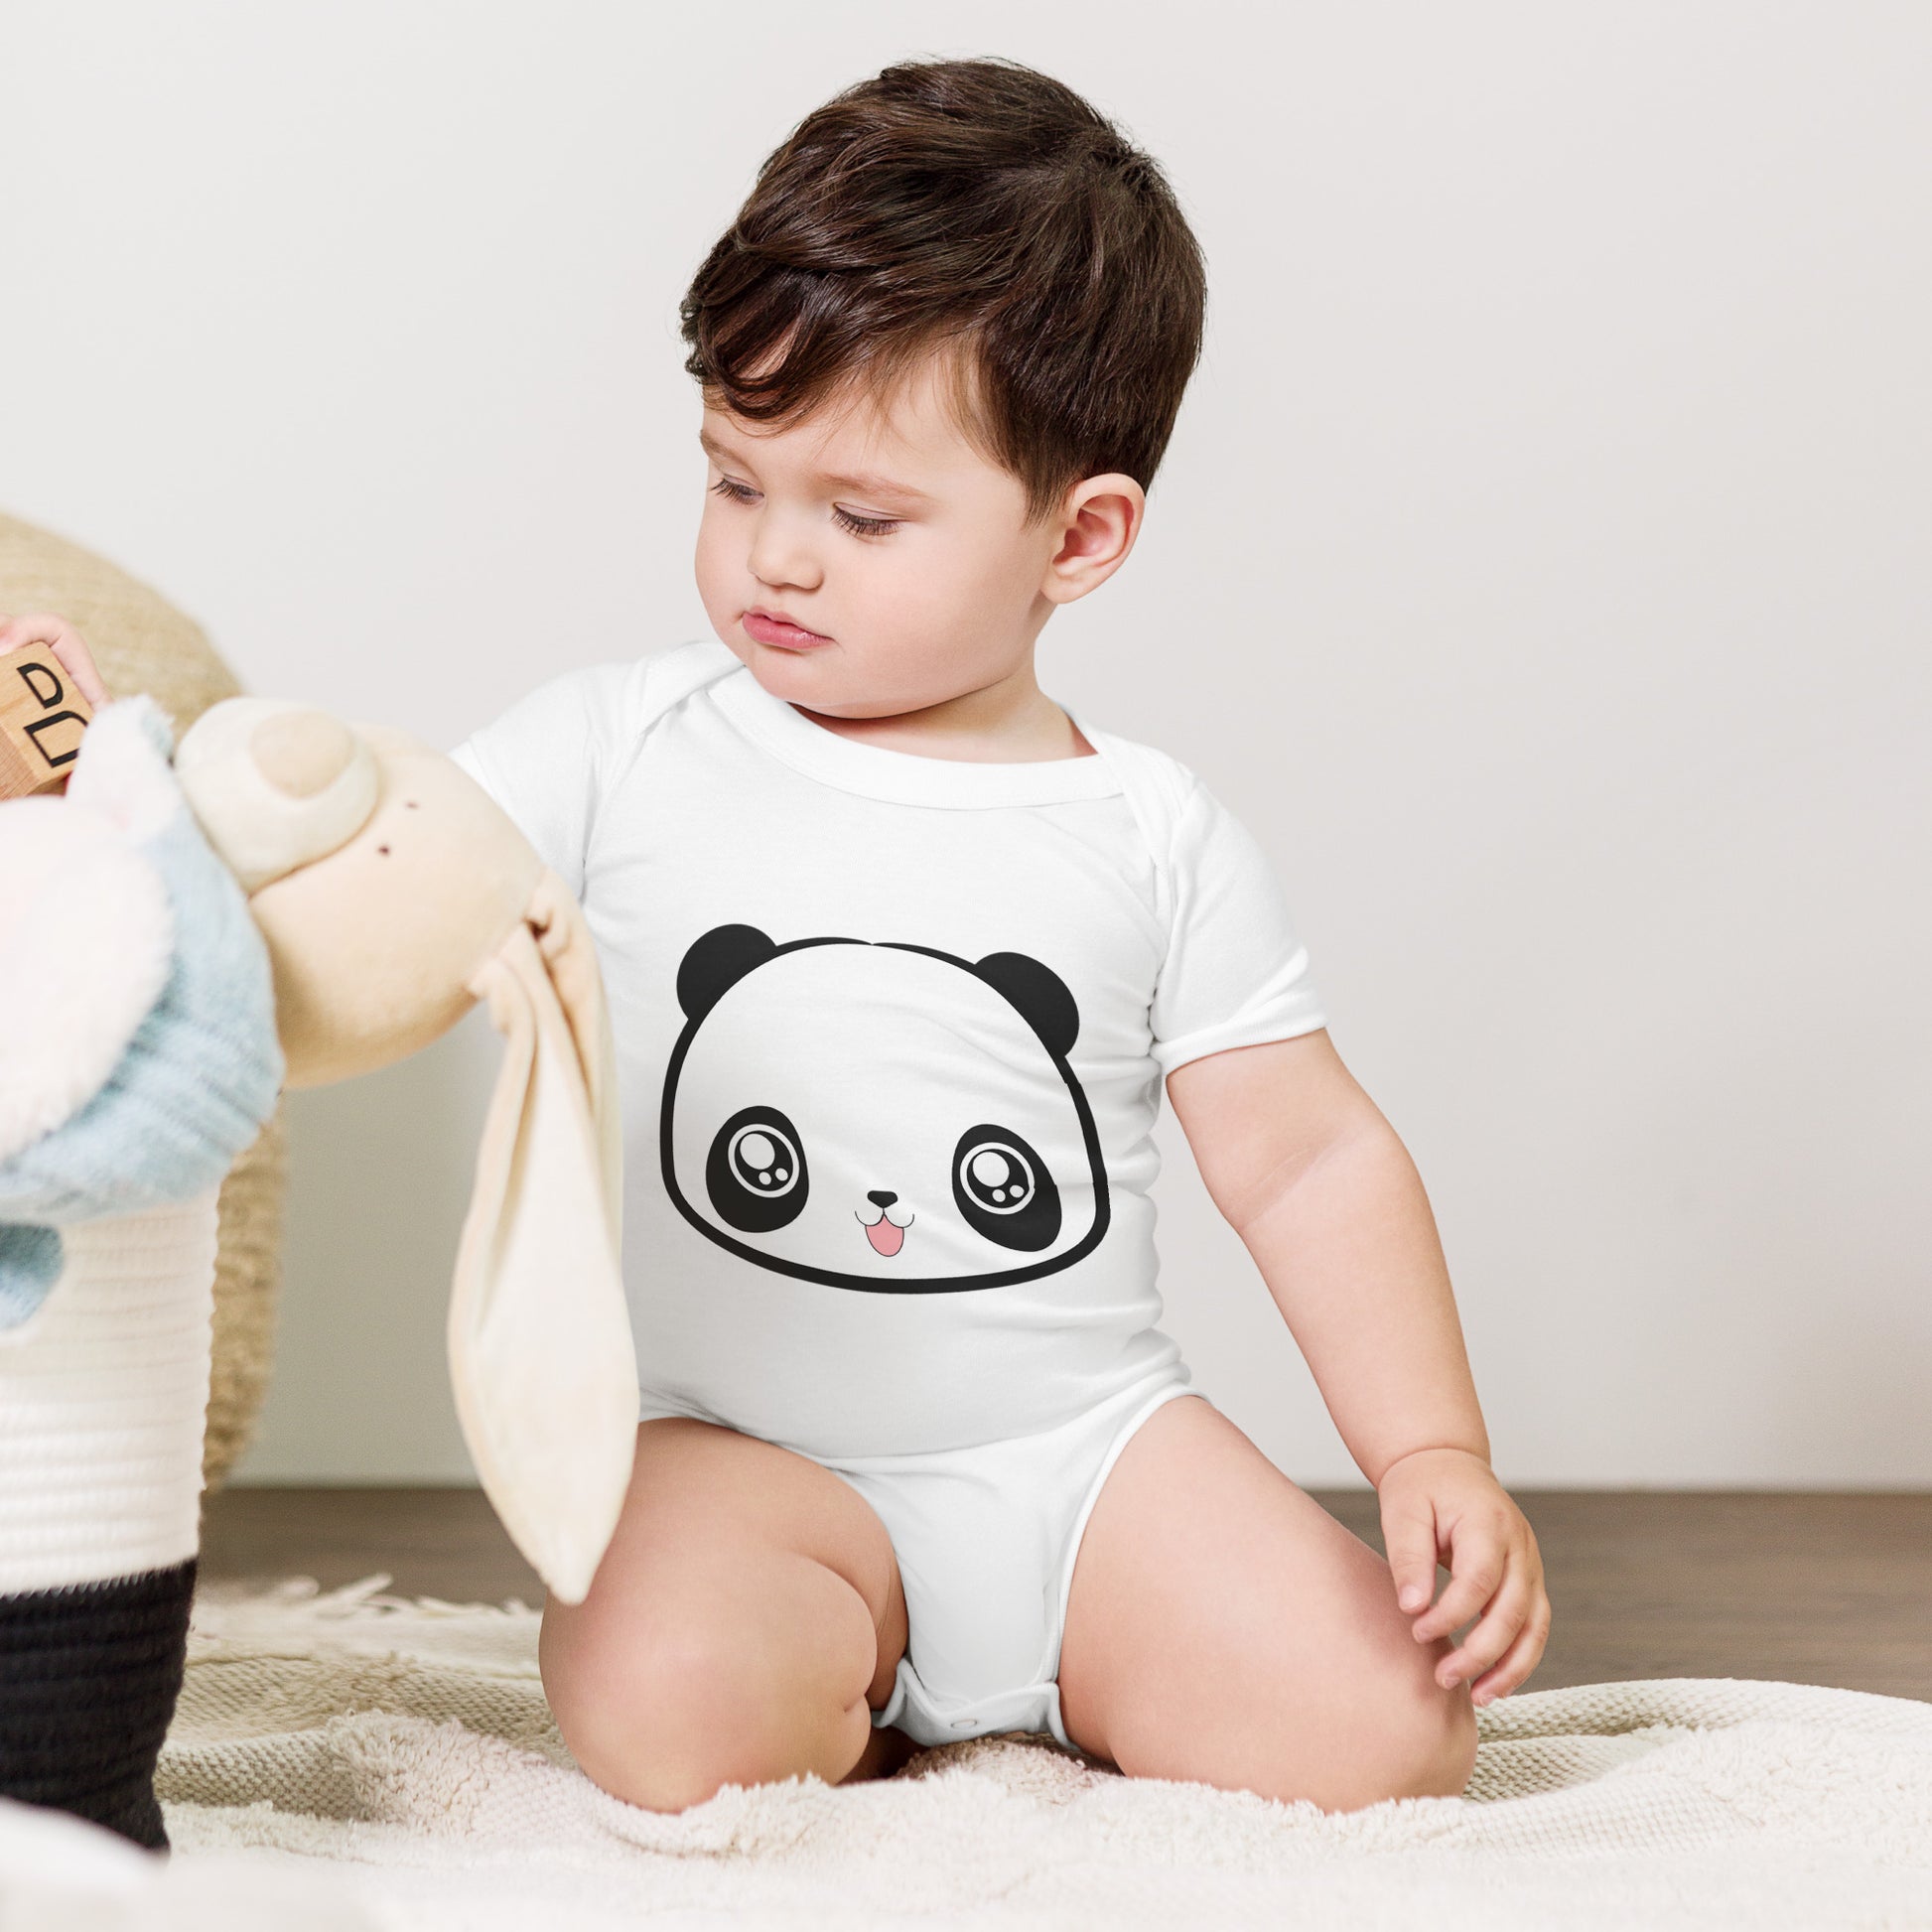 Baby with white babysuit with print of panda head